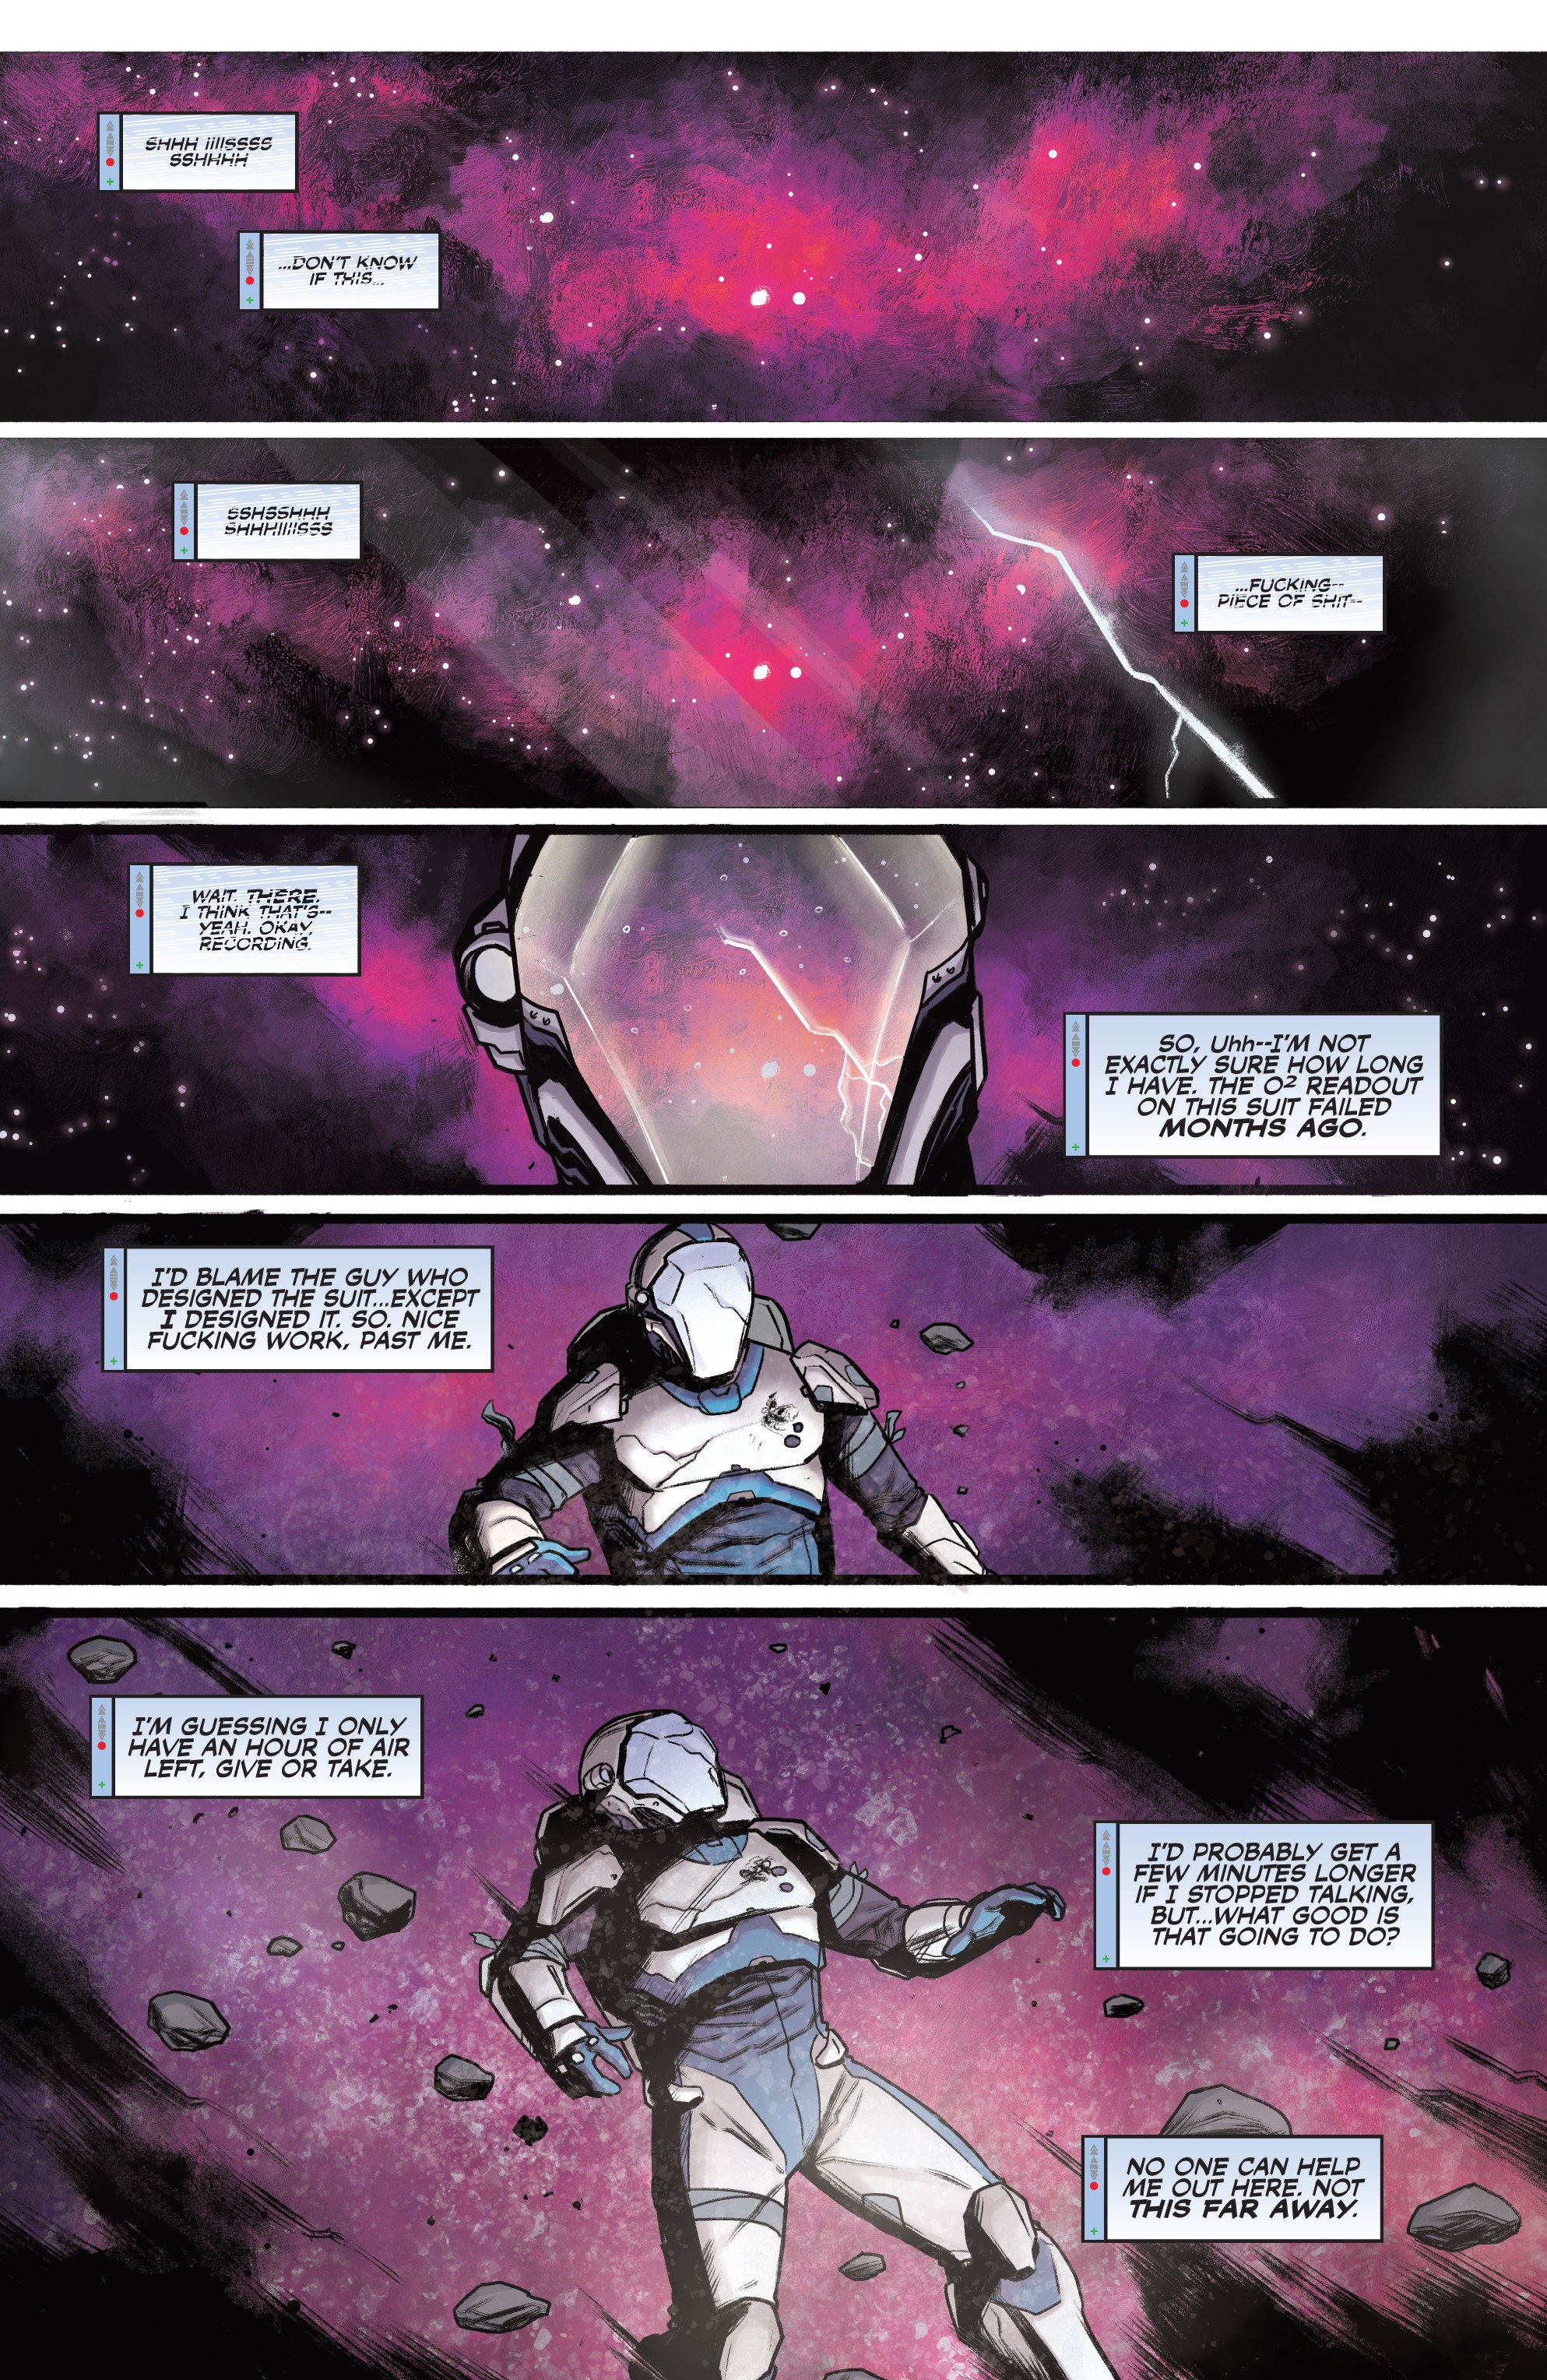 The Last Space Race (2018-): Chapter 1 - Page 3